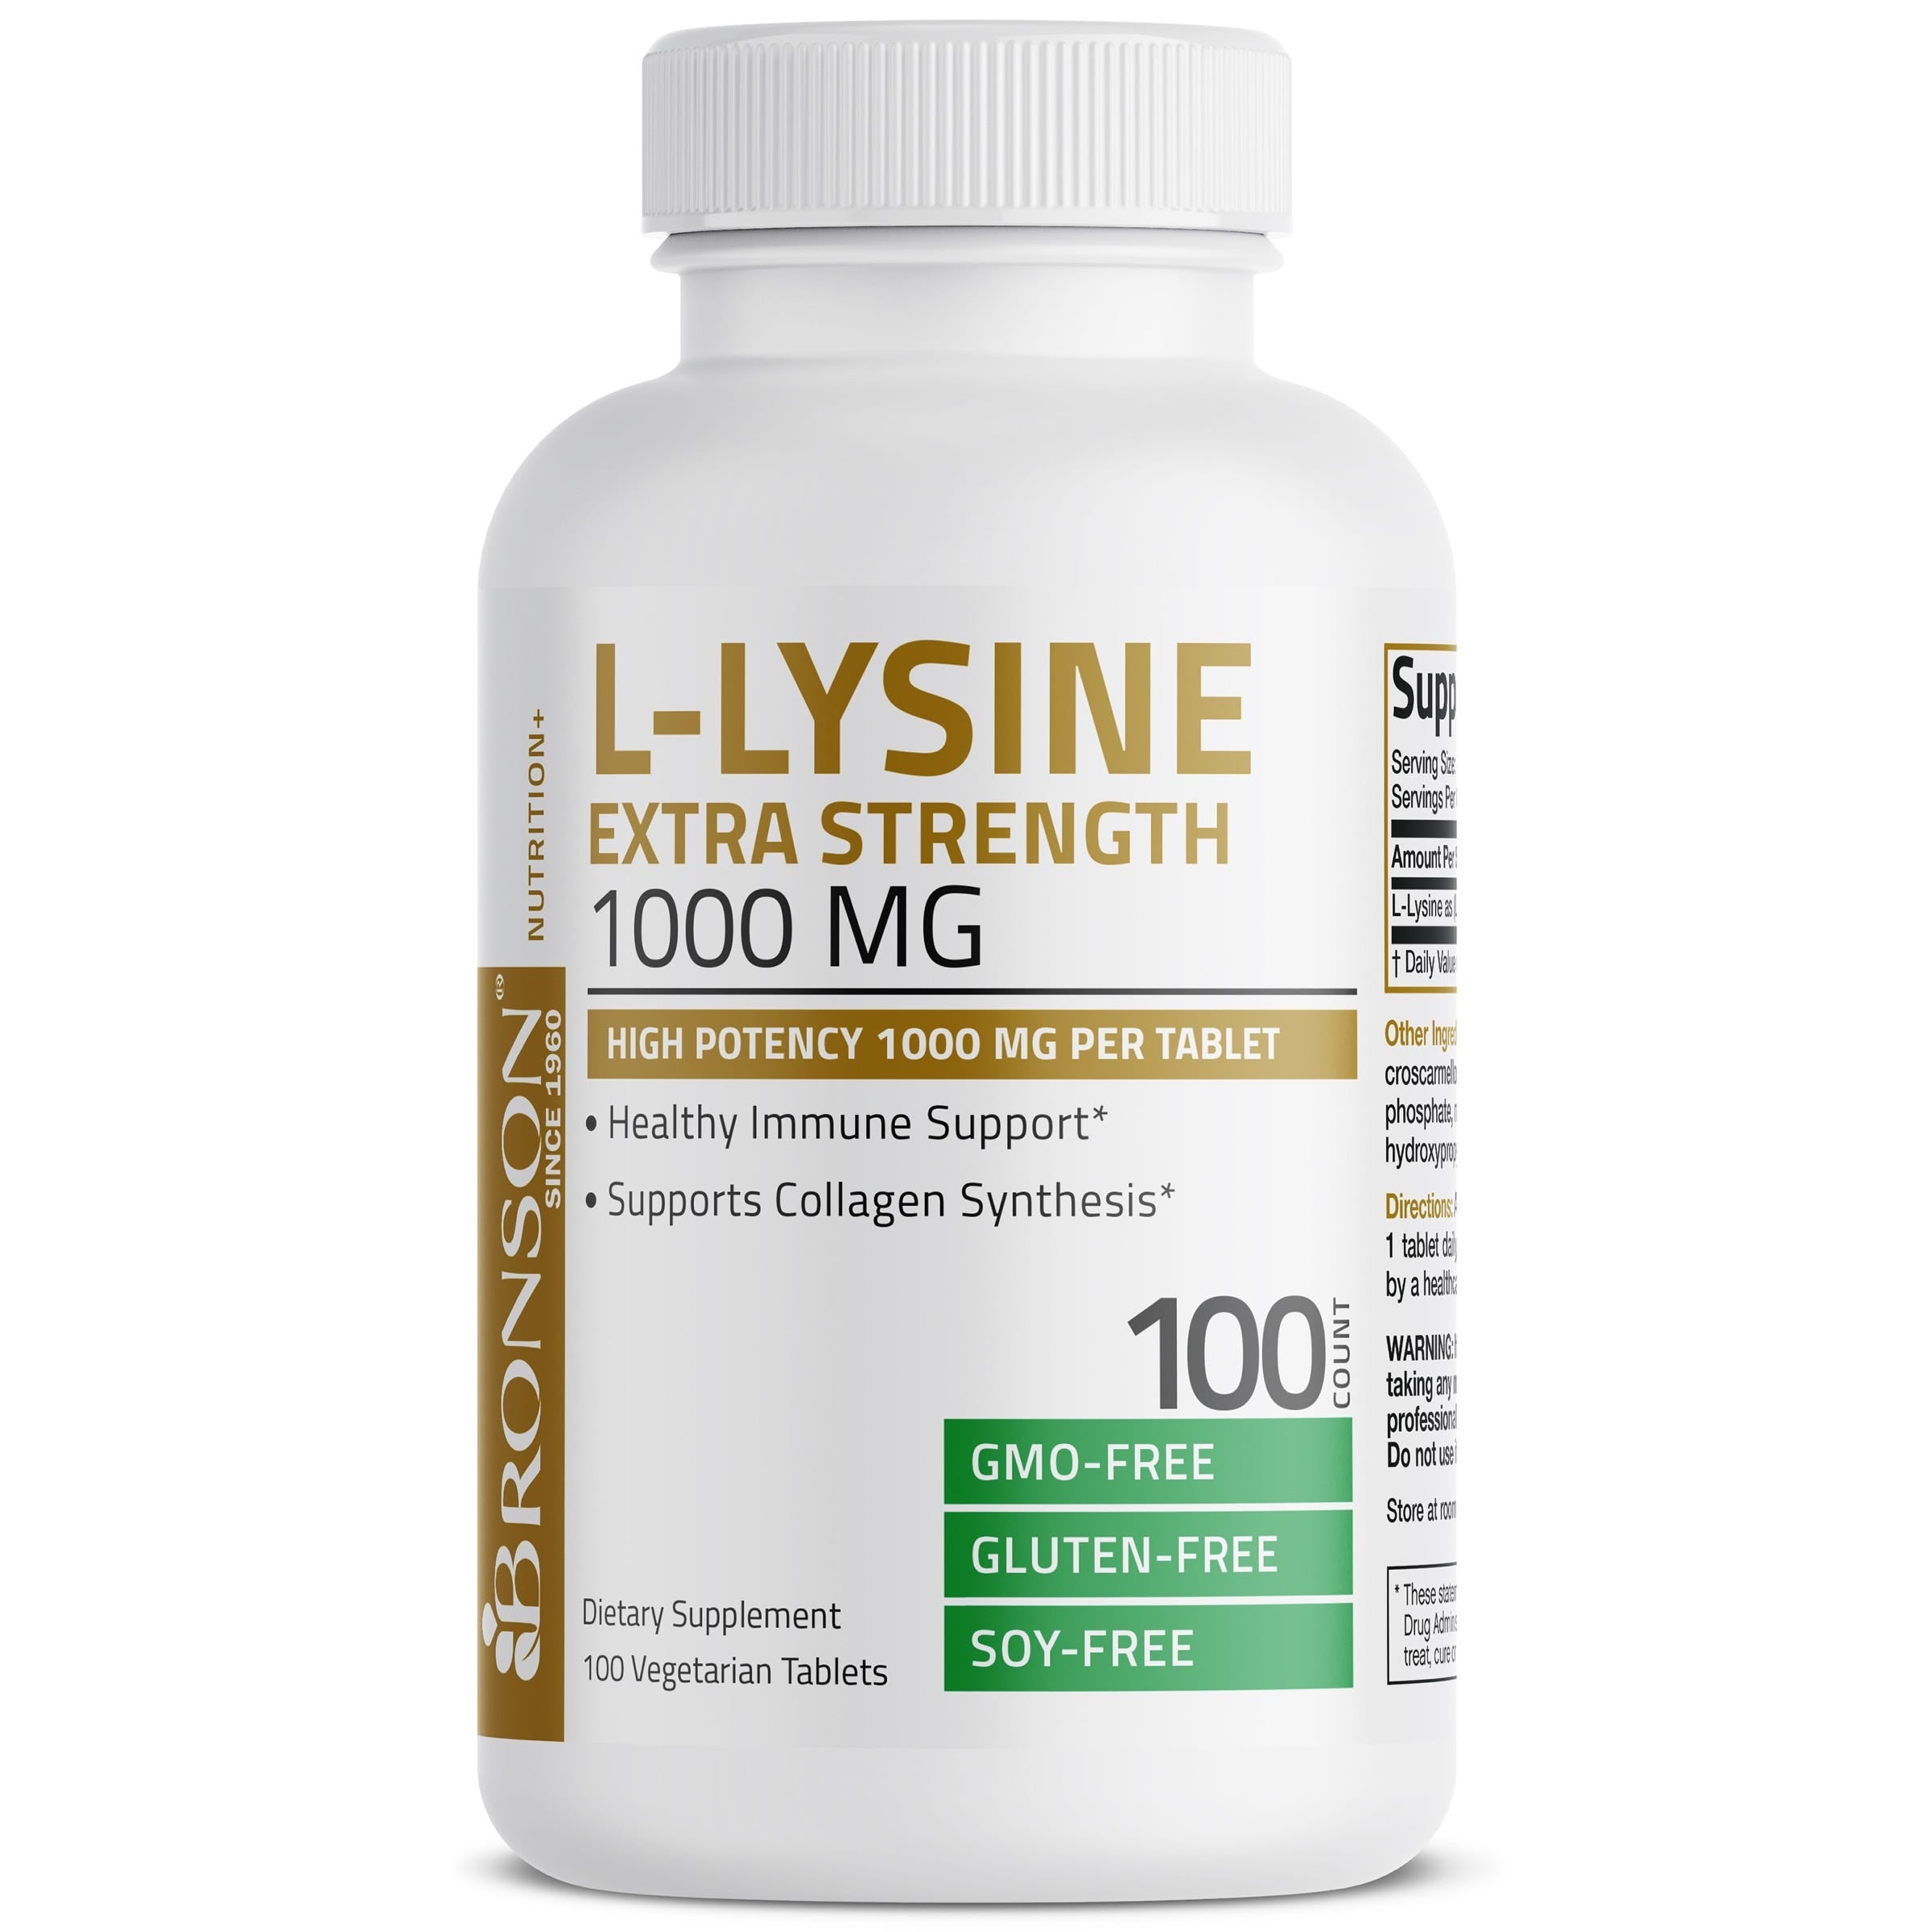 L-Lysine Extra Strength 1,000 MG view 3 of 6